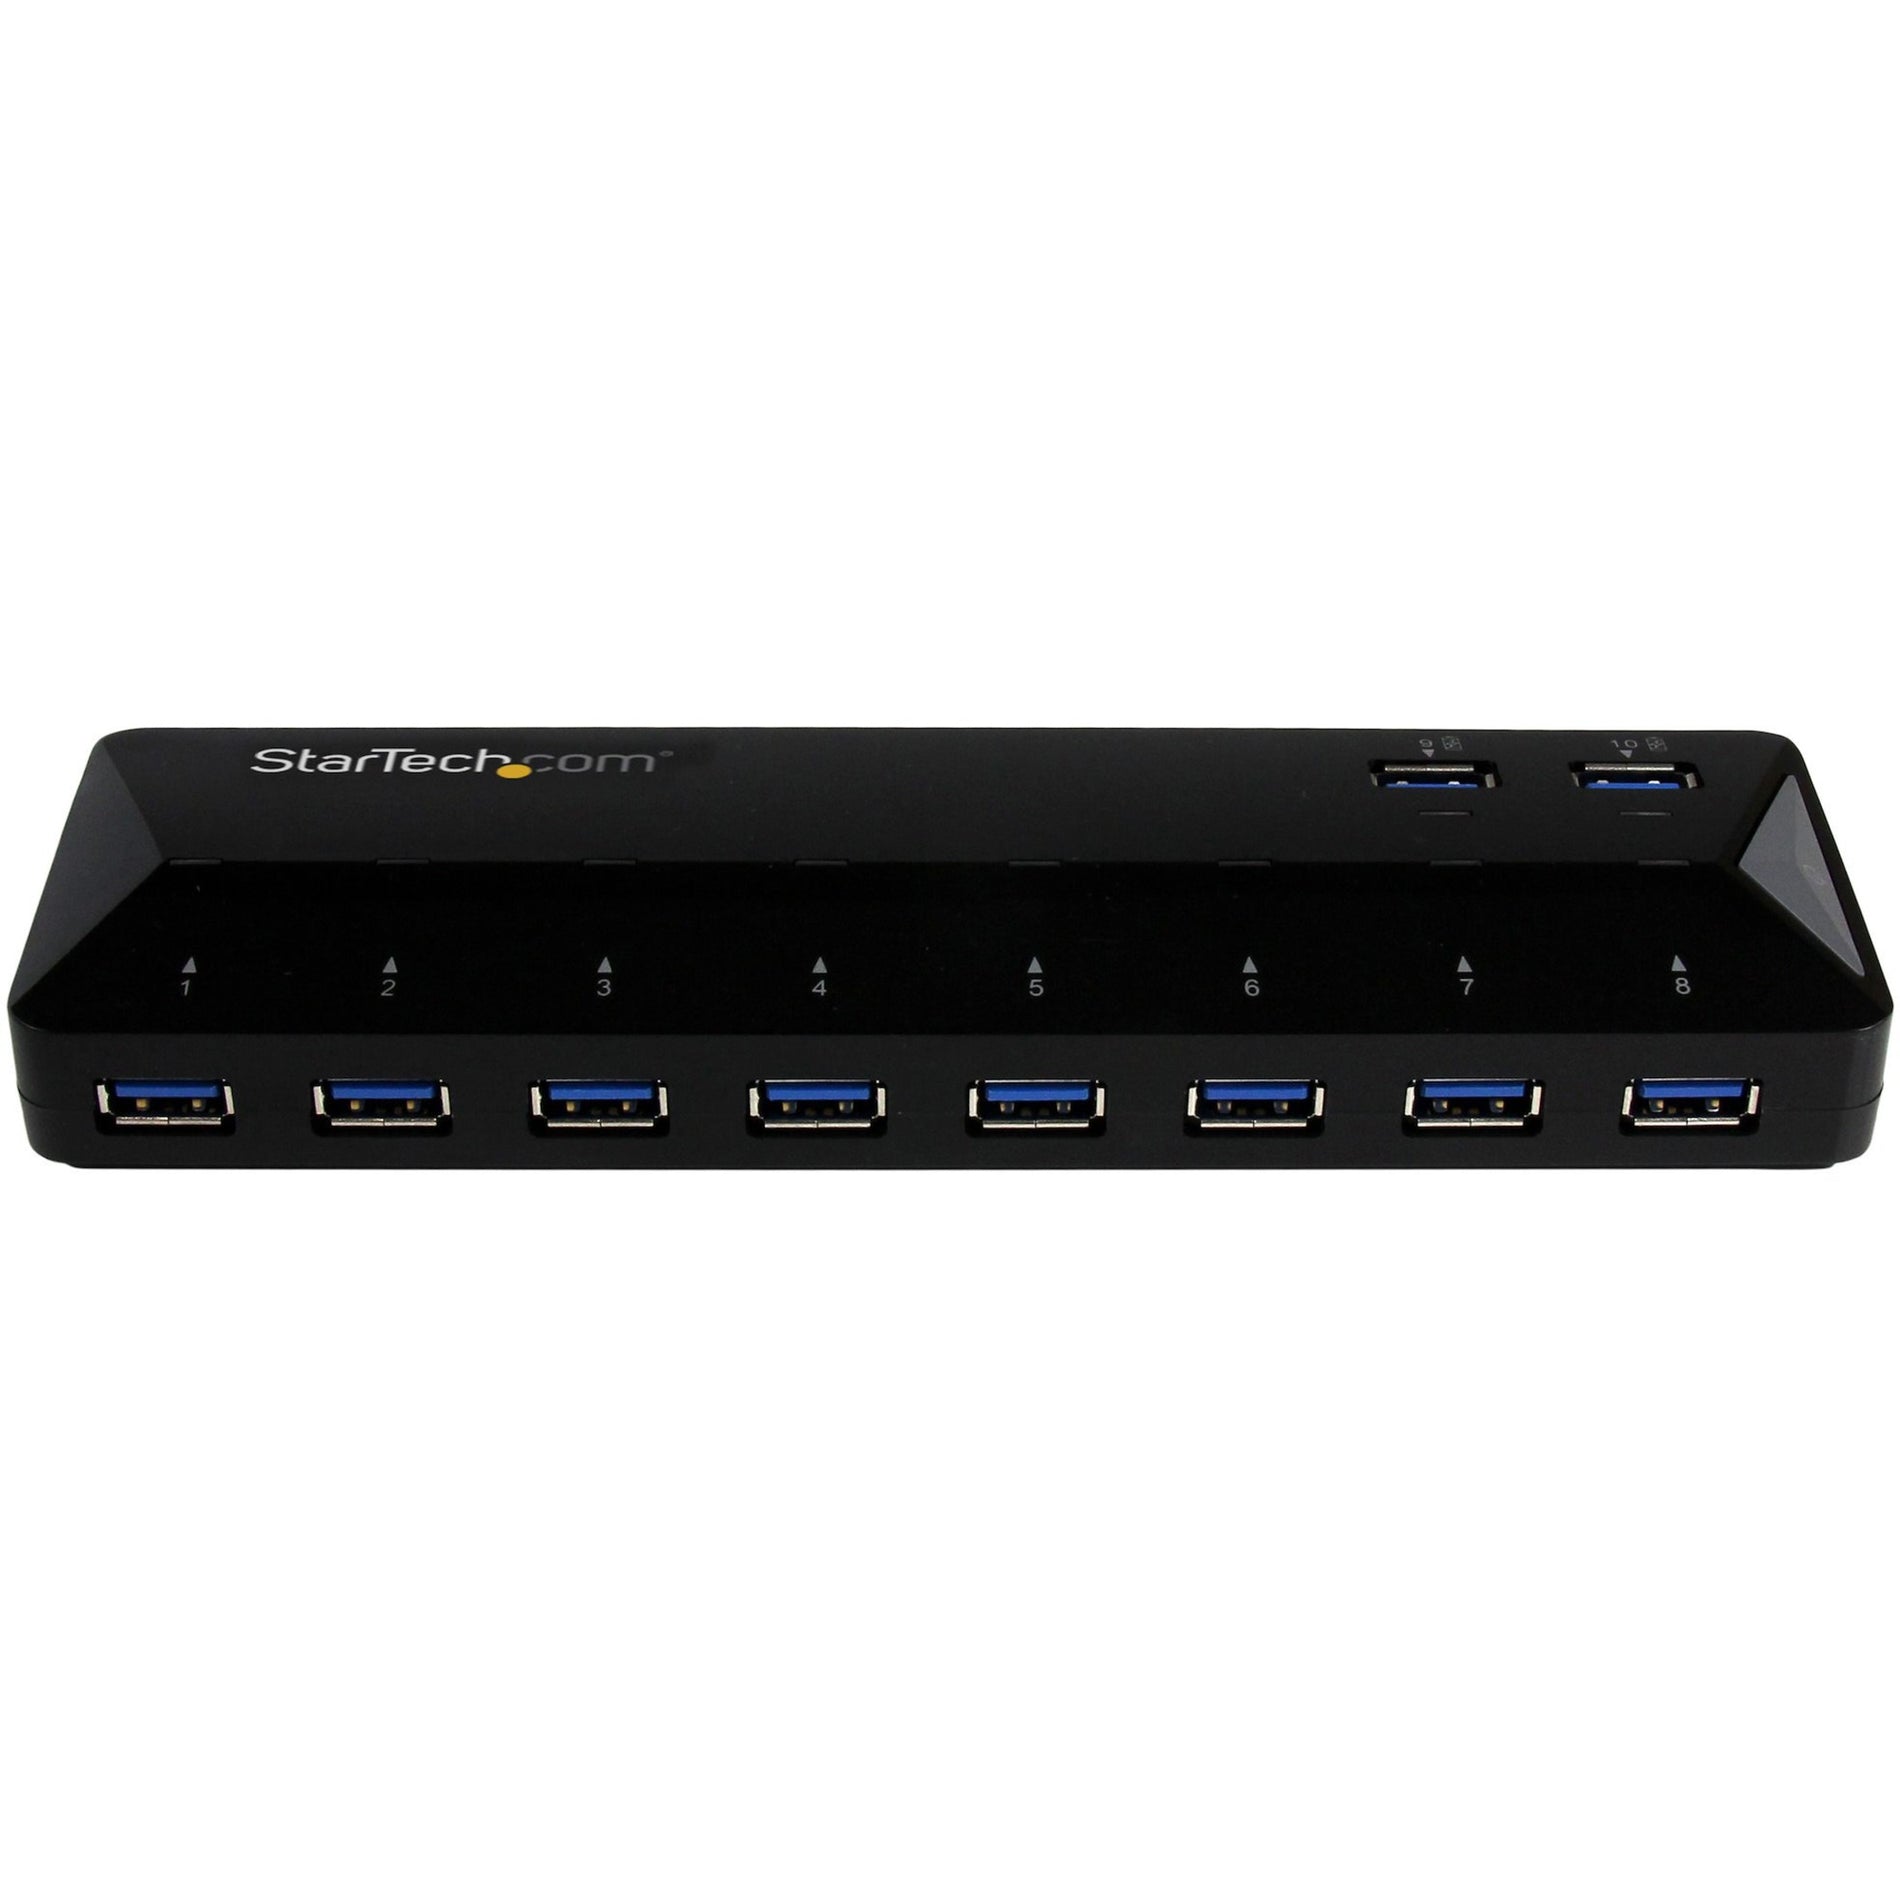 StarTech.com ST103008U2C 10-Port USB 3.0 Hub with Charge and Sync Ports, Fast-Charging Station, Black